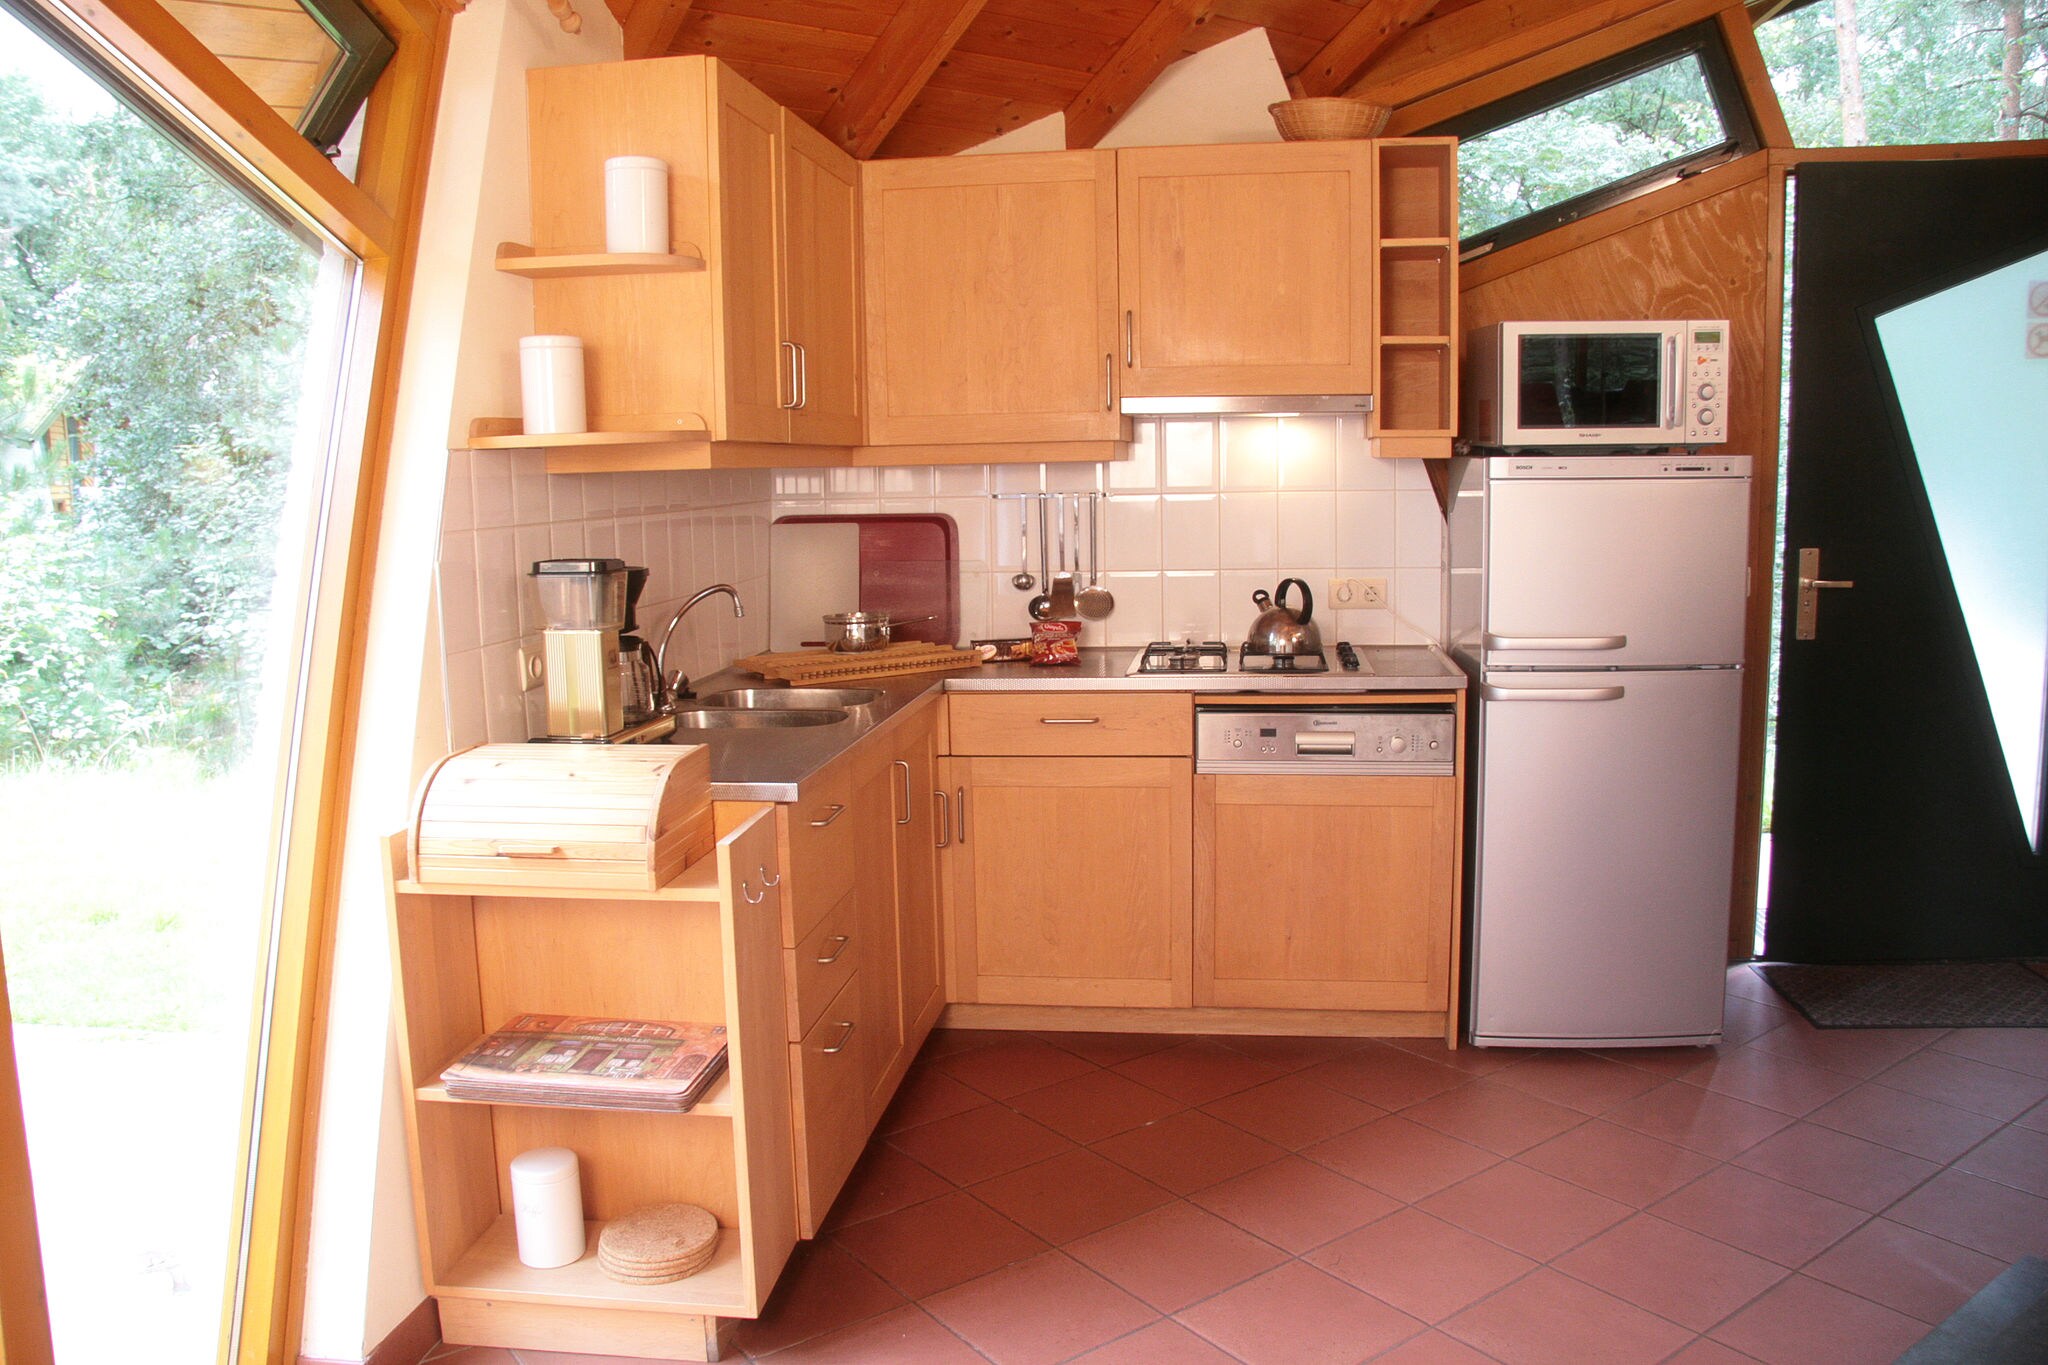 Eco holiday home with wood stove, in a holiday park in the middle of nature